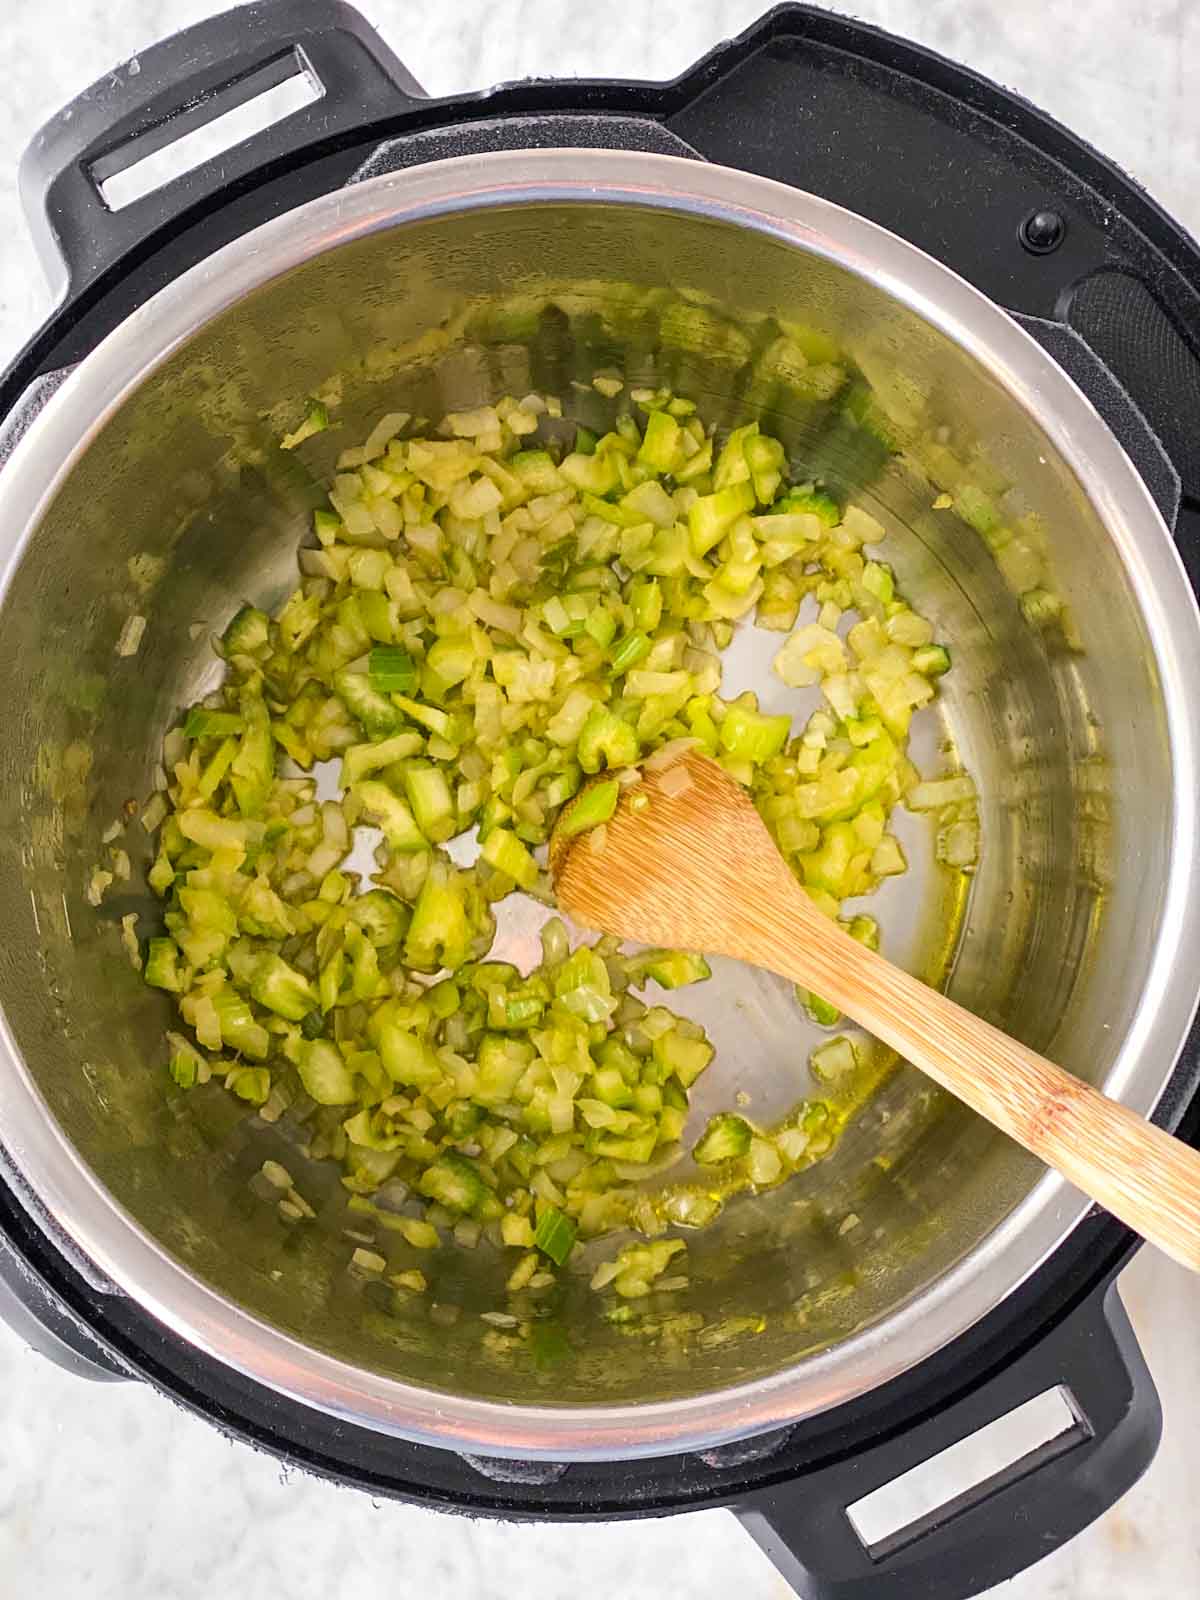 Sautéed onion and celery in instant pot with wooden spoon stirring